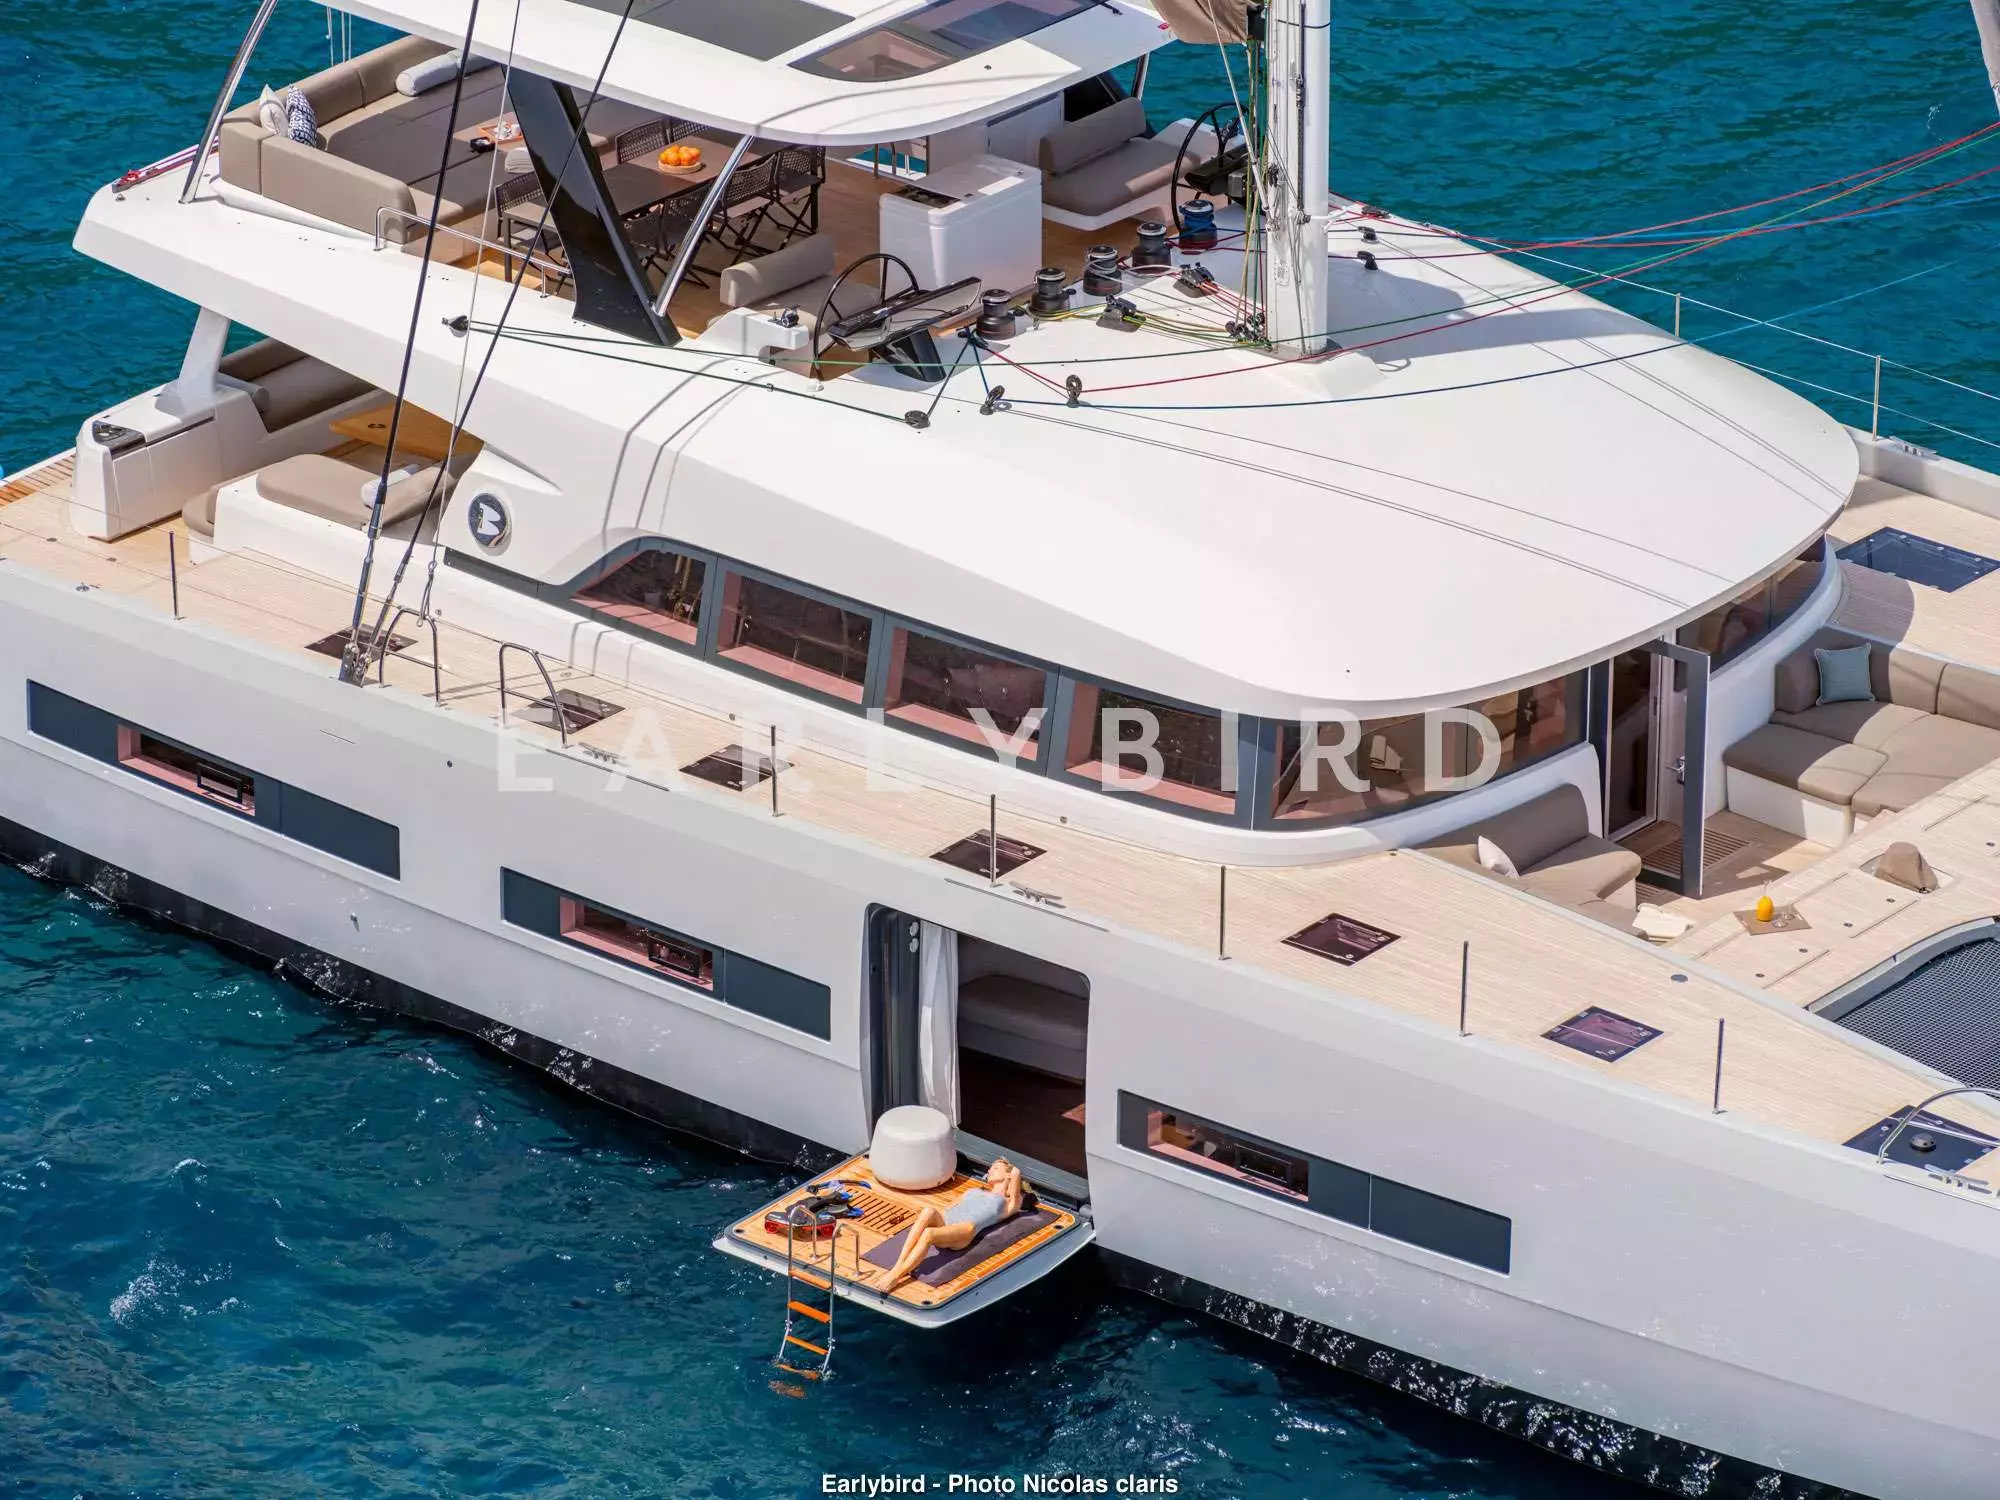 Earlybird by Lagoon - Top rates for a Charter of a private Luxury Catamaran in Grenada